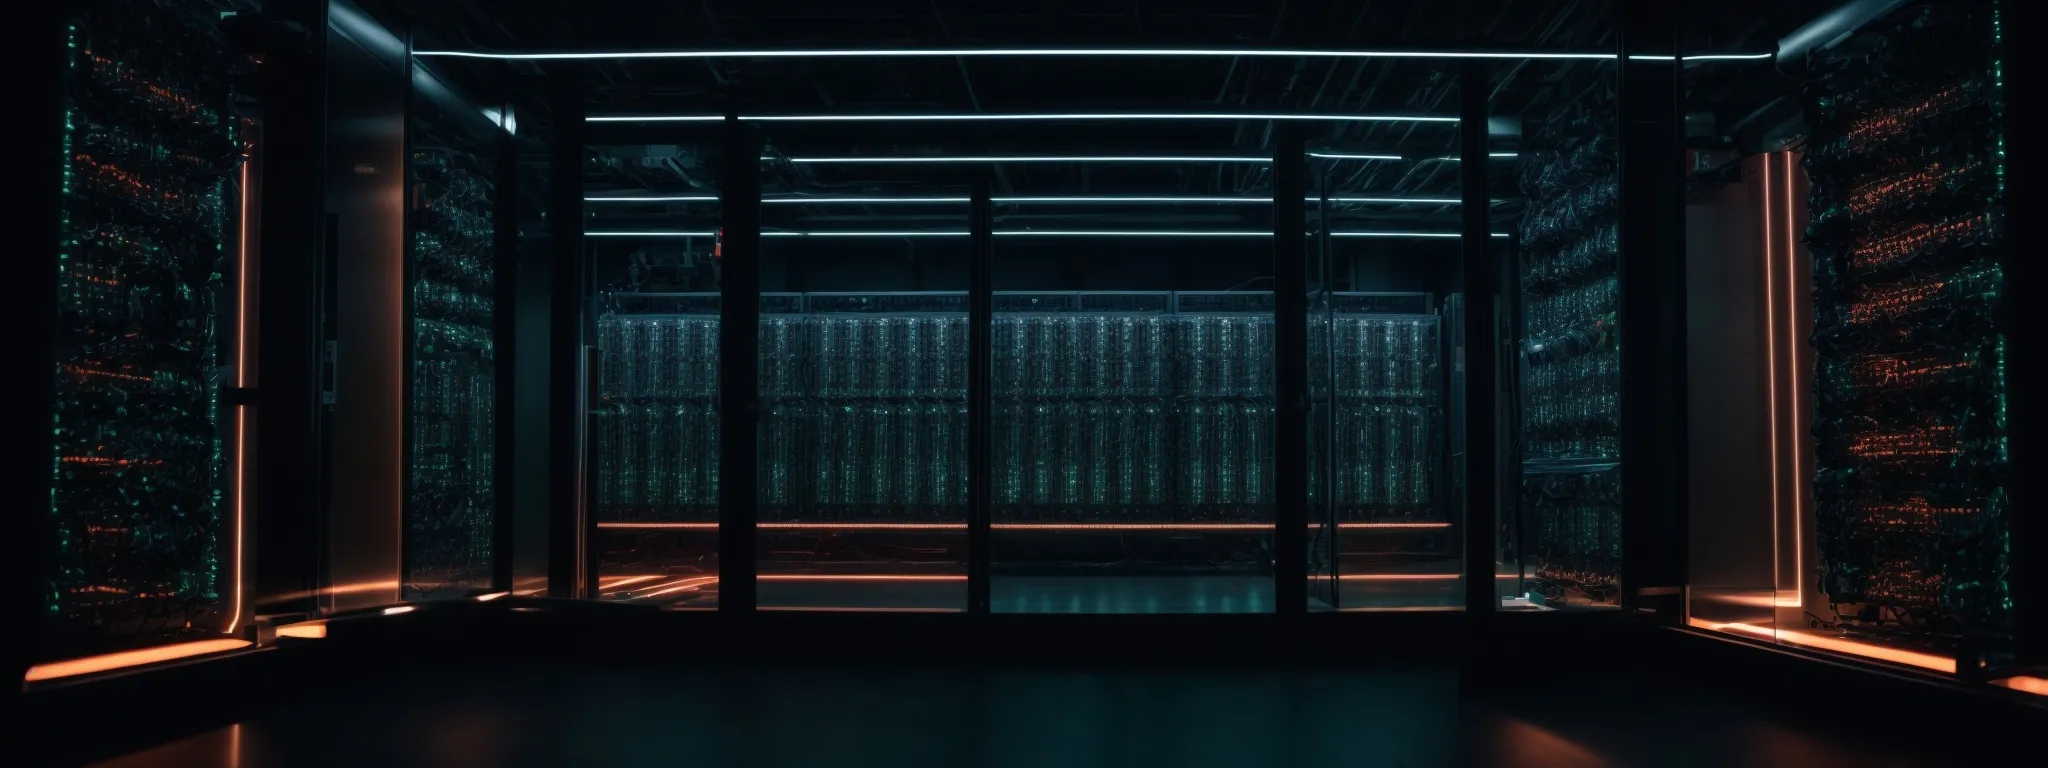 a server rack in a data center with glowing led lights conveying high-speed data and internet connectivity.